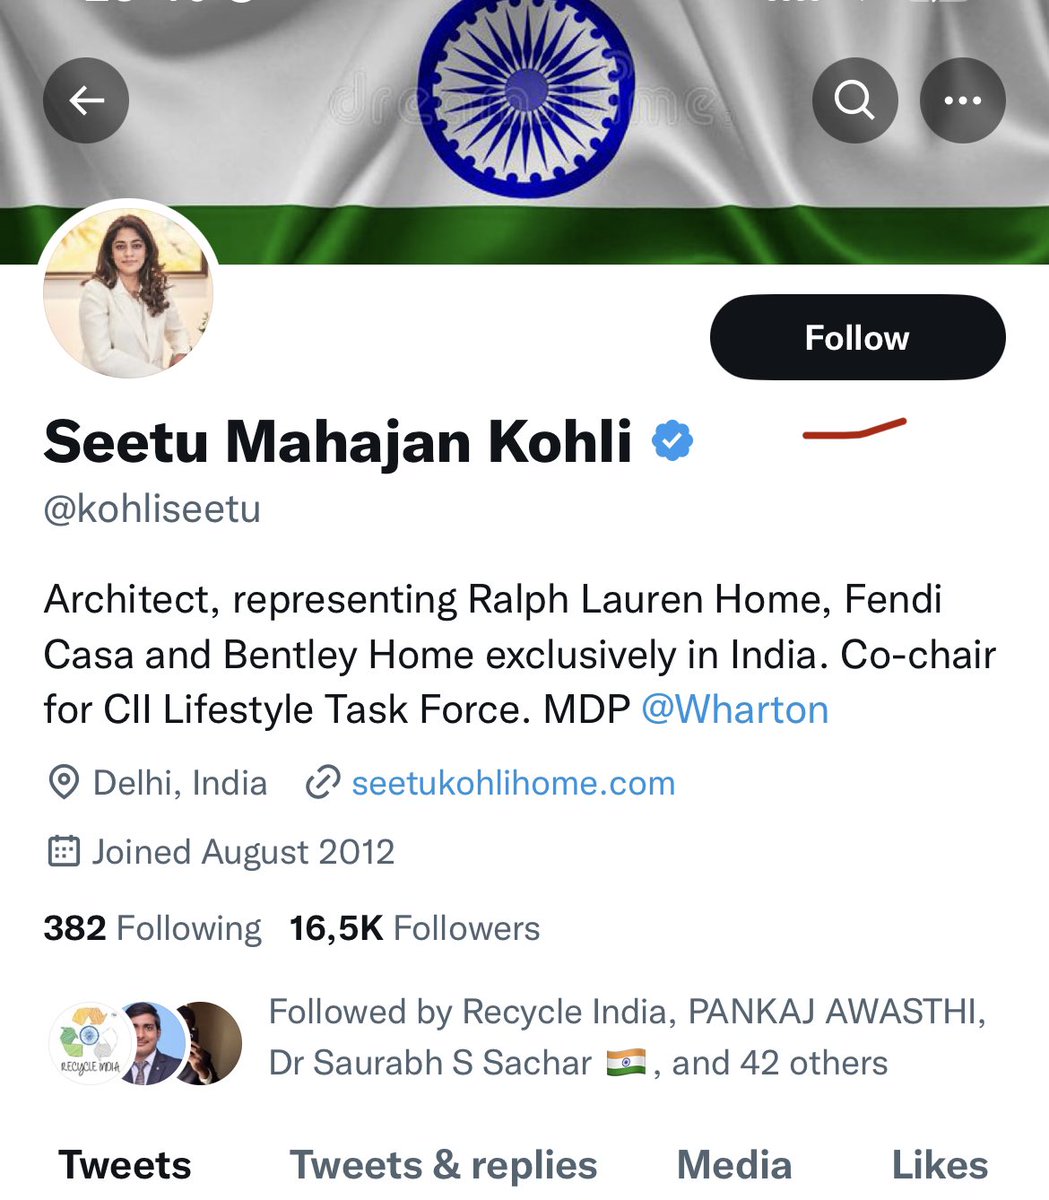 @kohliseetu @vivekagnihotri Dear #RalphLaurenHome #FendiCasa #BentleyHome @RalphLauren @Fendi @BentleyHomesLtd IS THIS LADY REPRESENTING YOU IN INDIA? Why???? Disrespectful towards ppl who work hard to bring facts to the world! @HMOIndia 🙏🏽